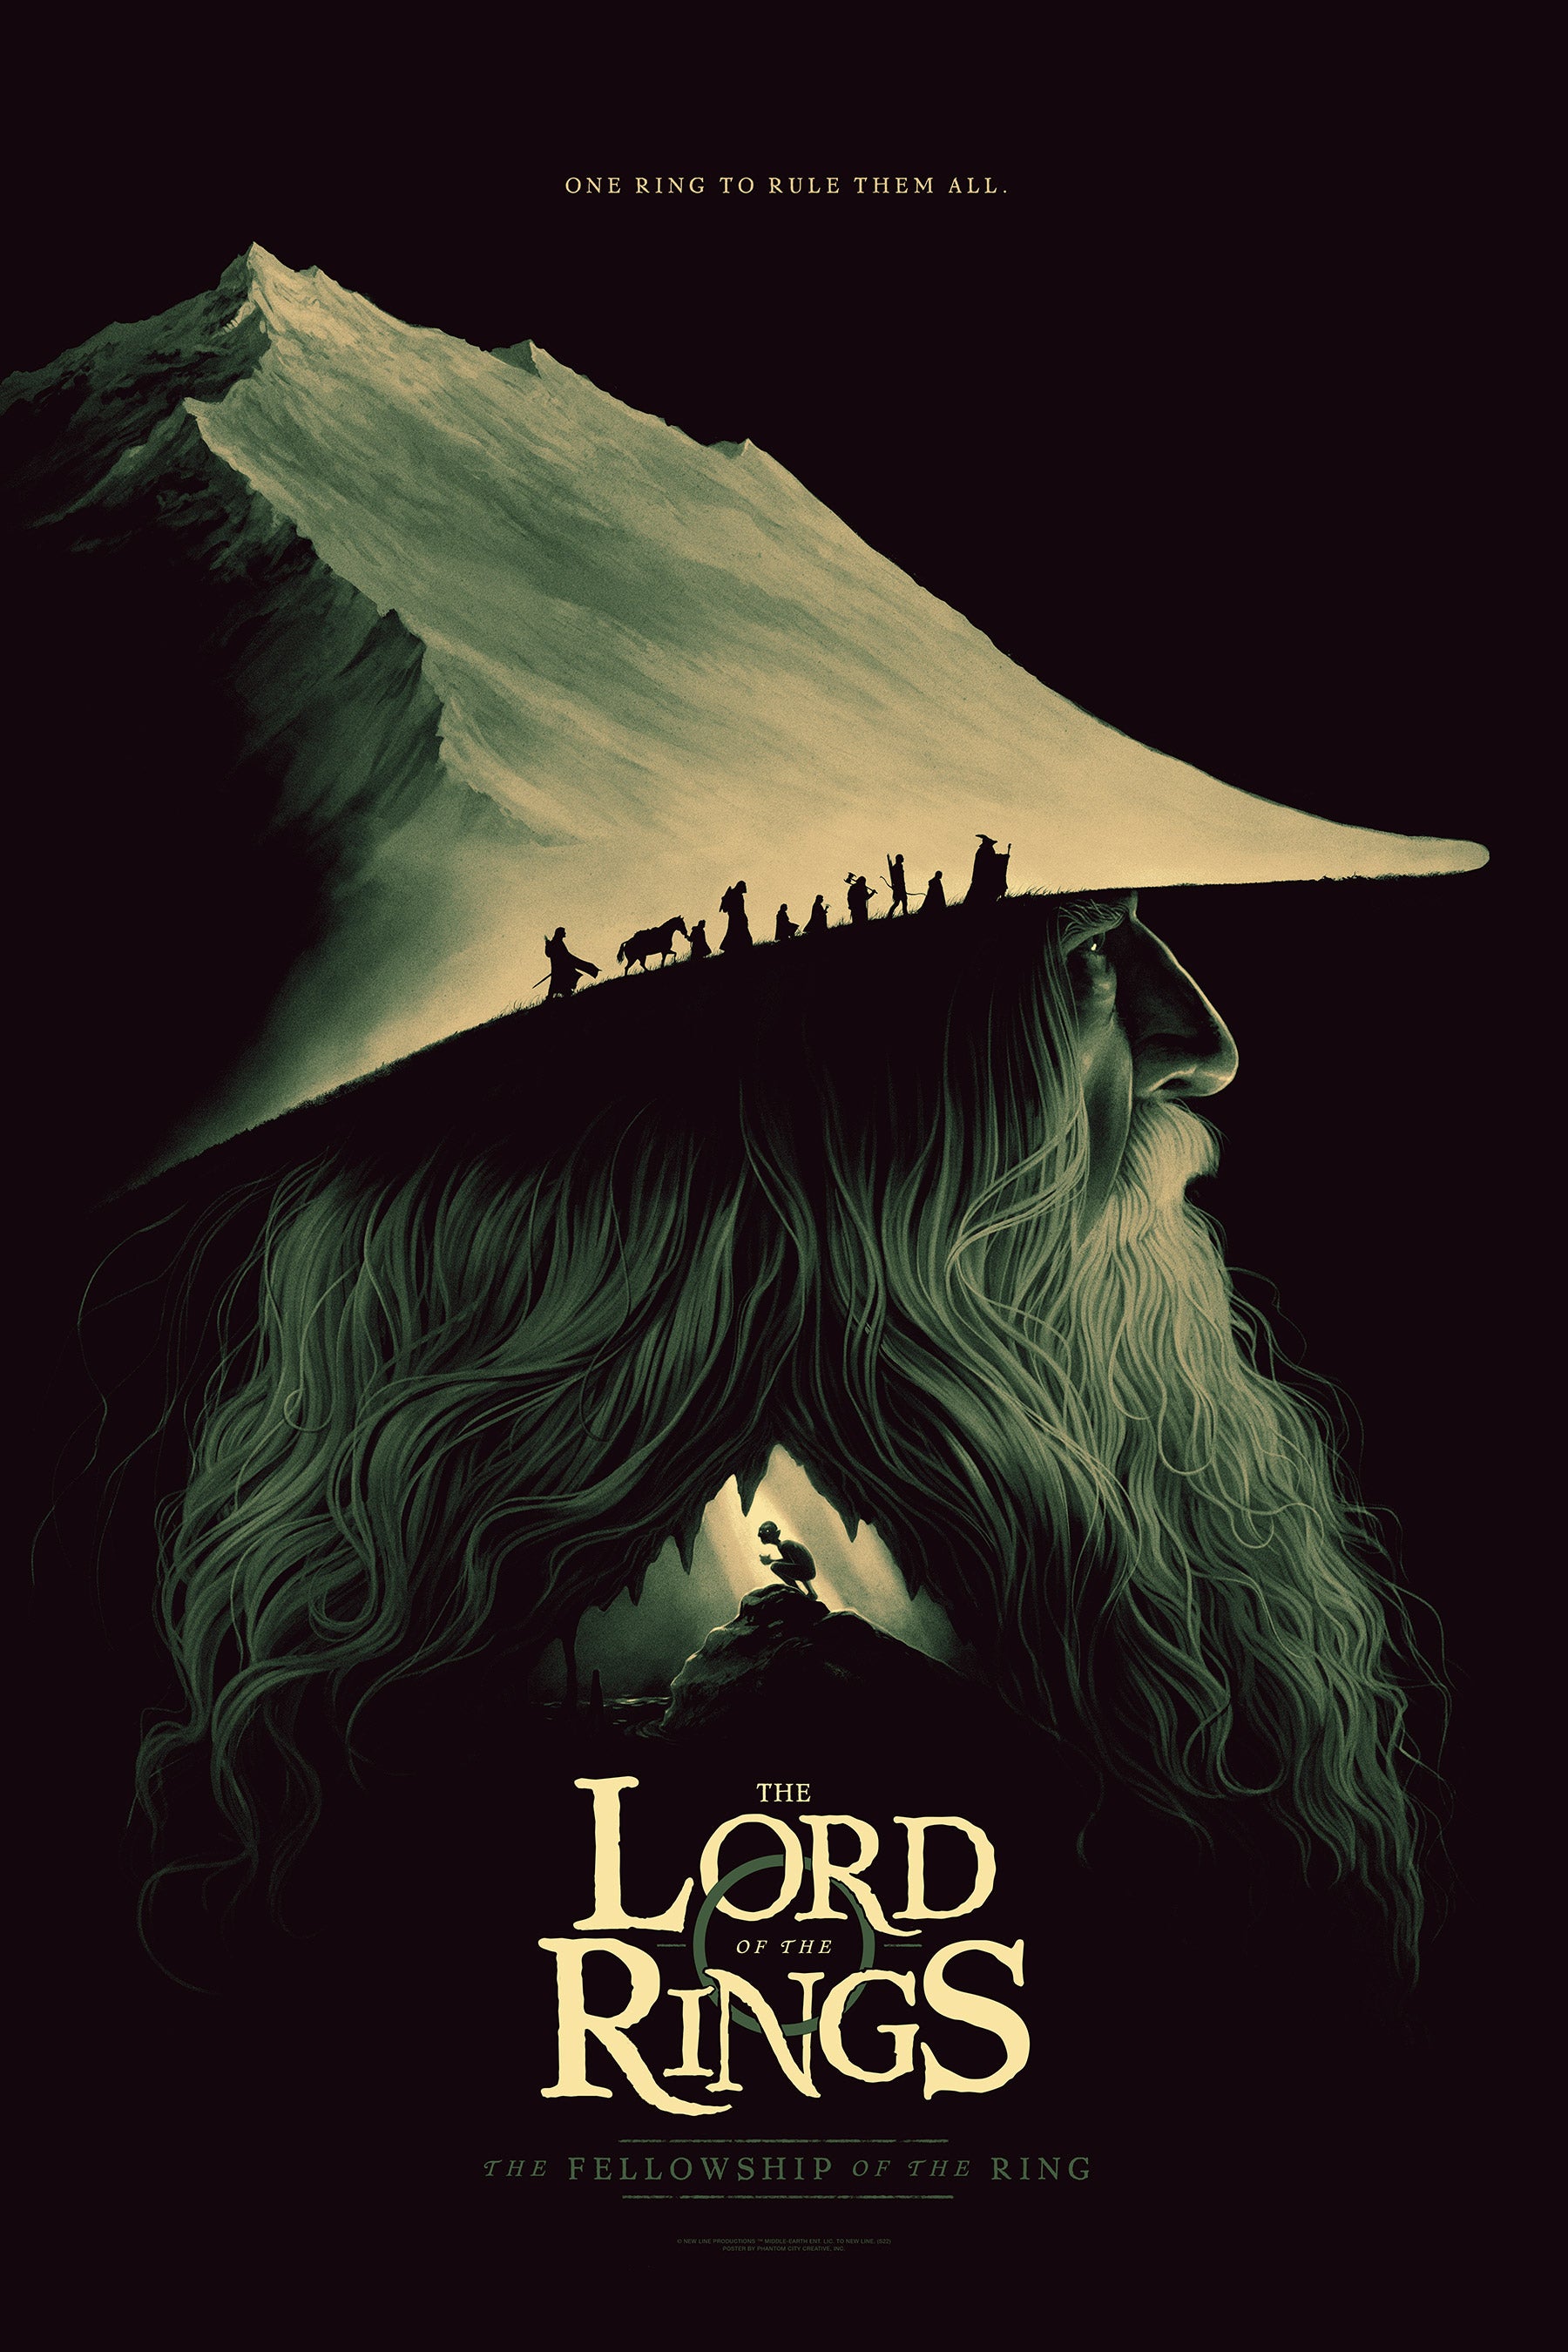 The Lord of the Rings Trilogy (2001) [8196x4096] by Phantom City Creative :  r/MoviePosterPorn